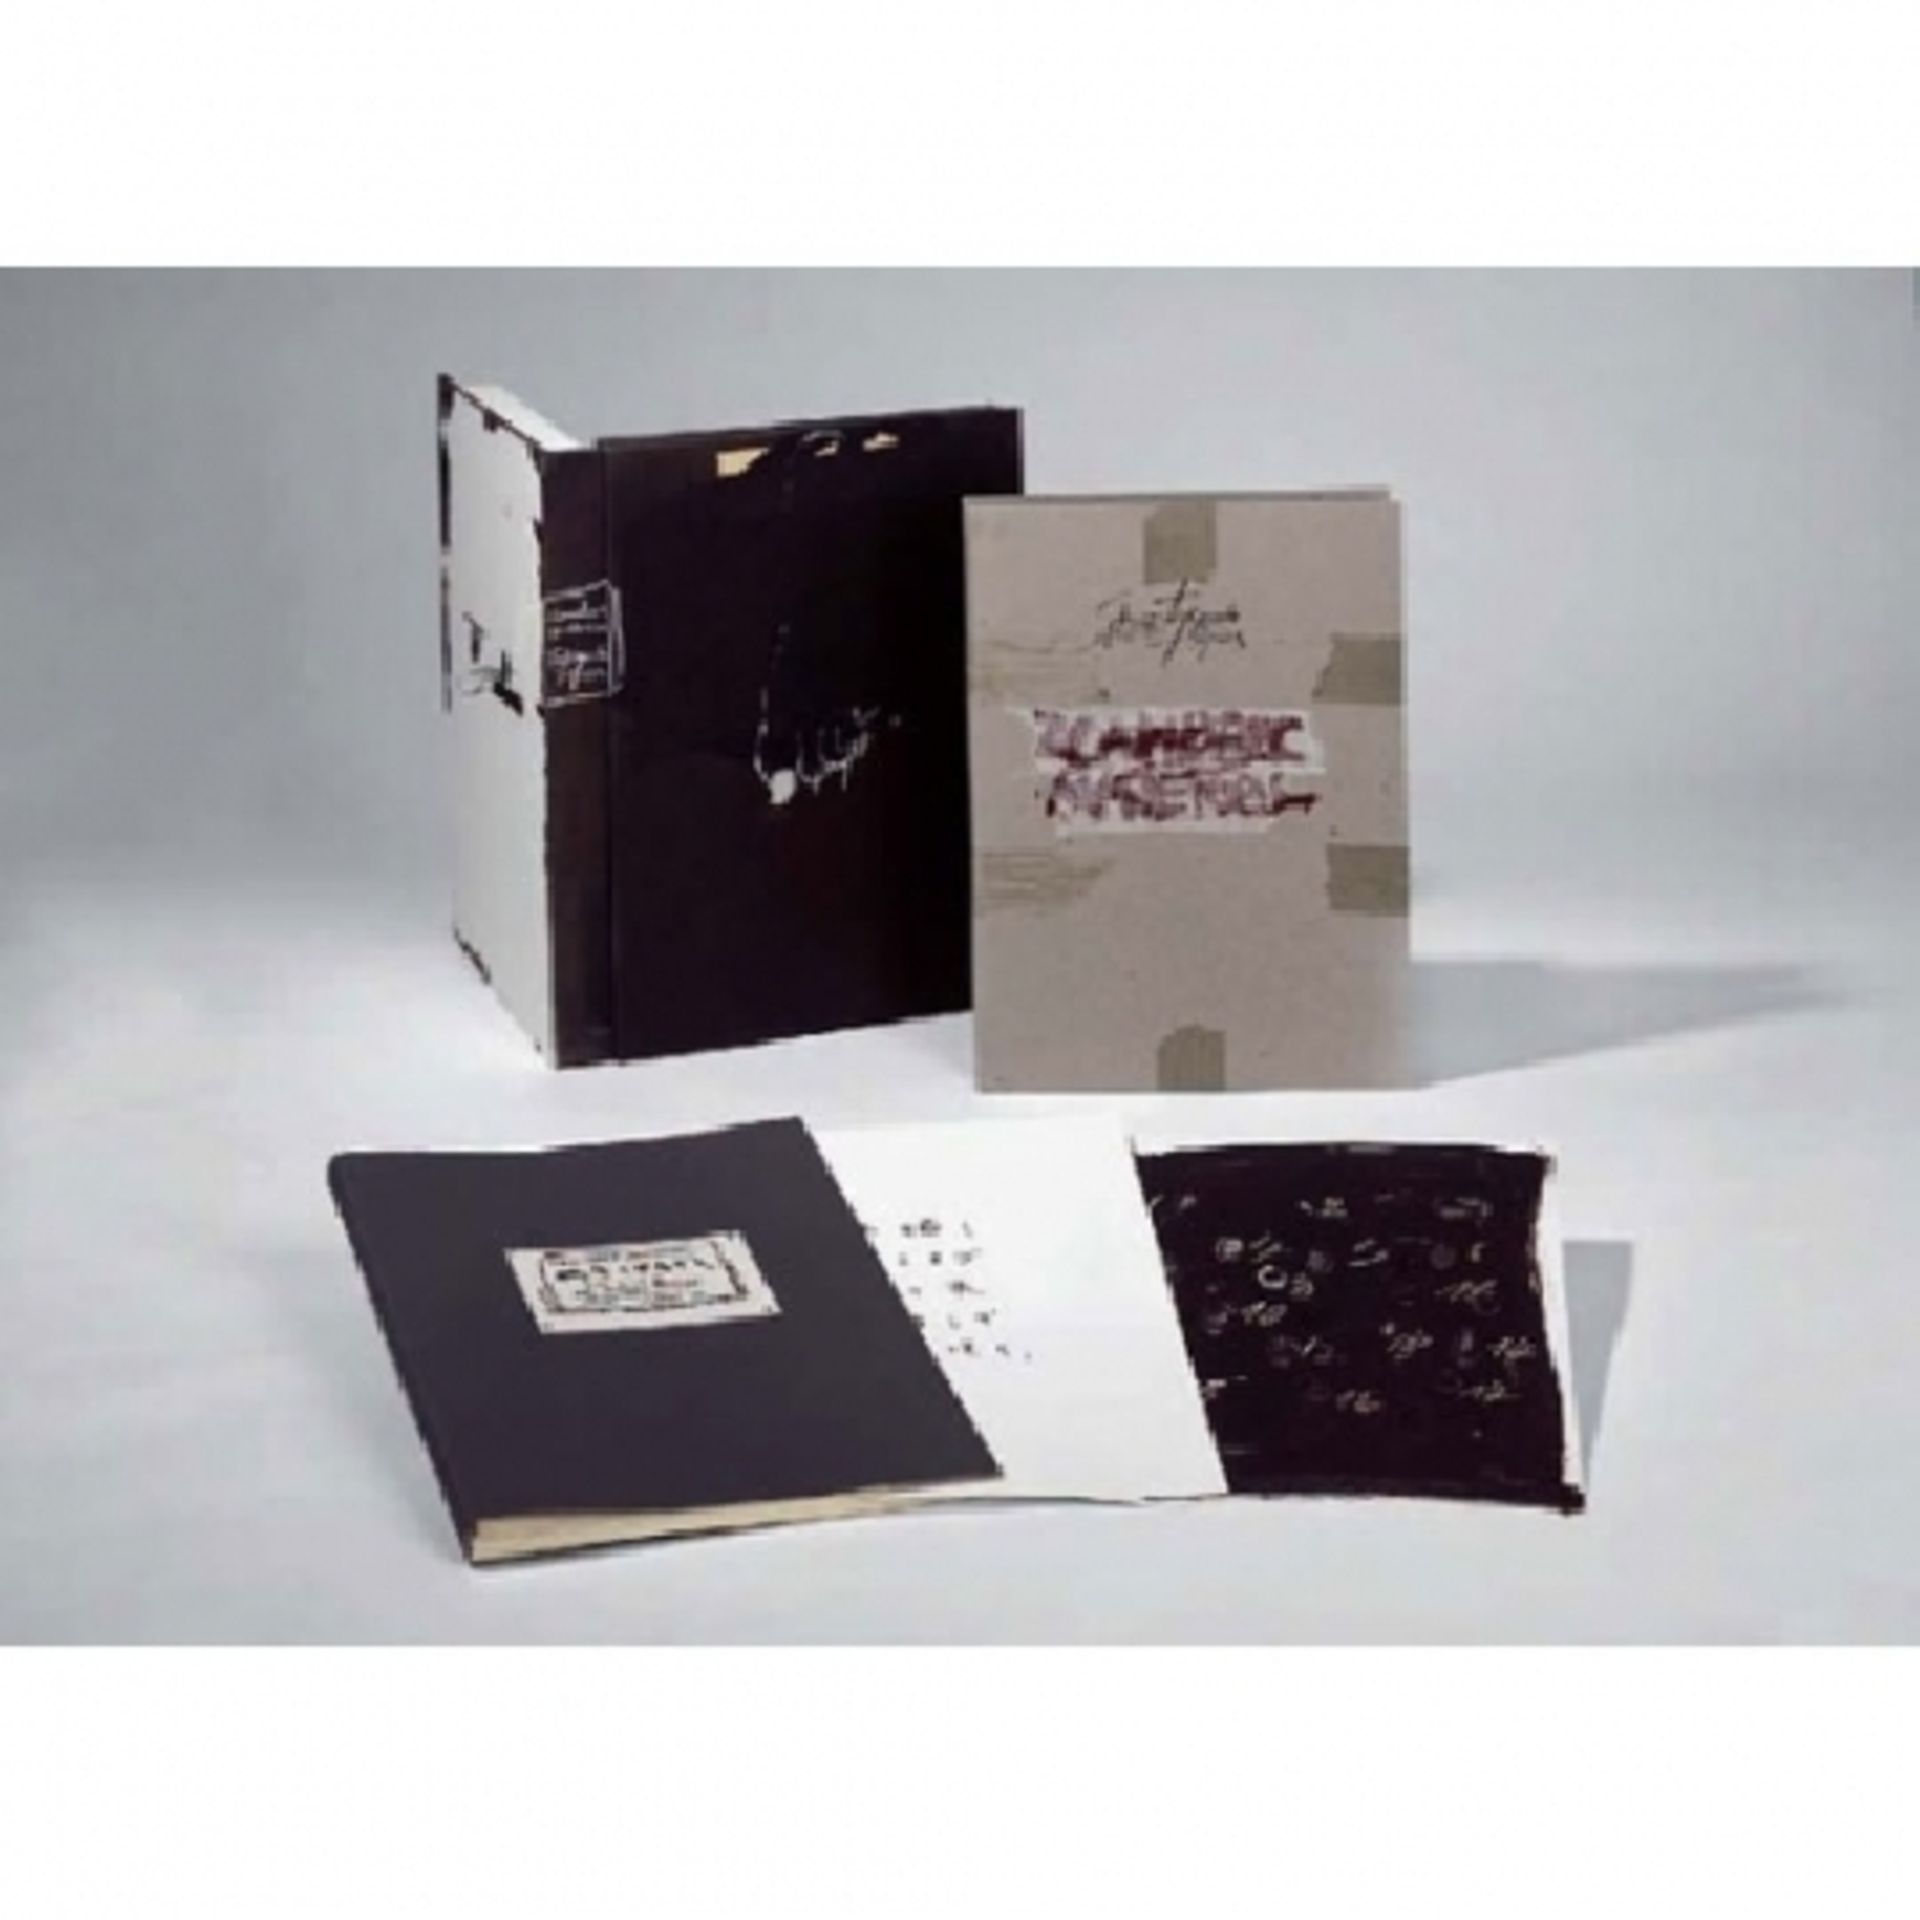 Antoni TAPIES LLAMBREC MATERIAL, 1975 Very beautiful artist's book with lithographs [...]